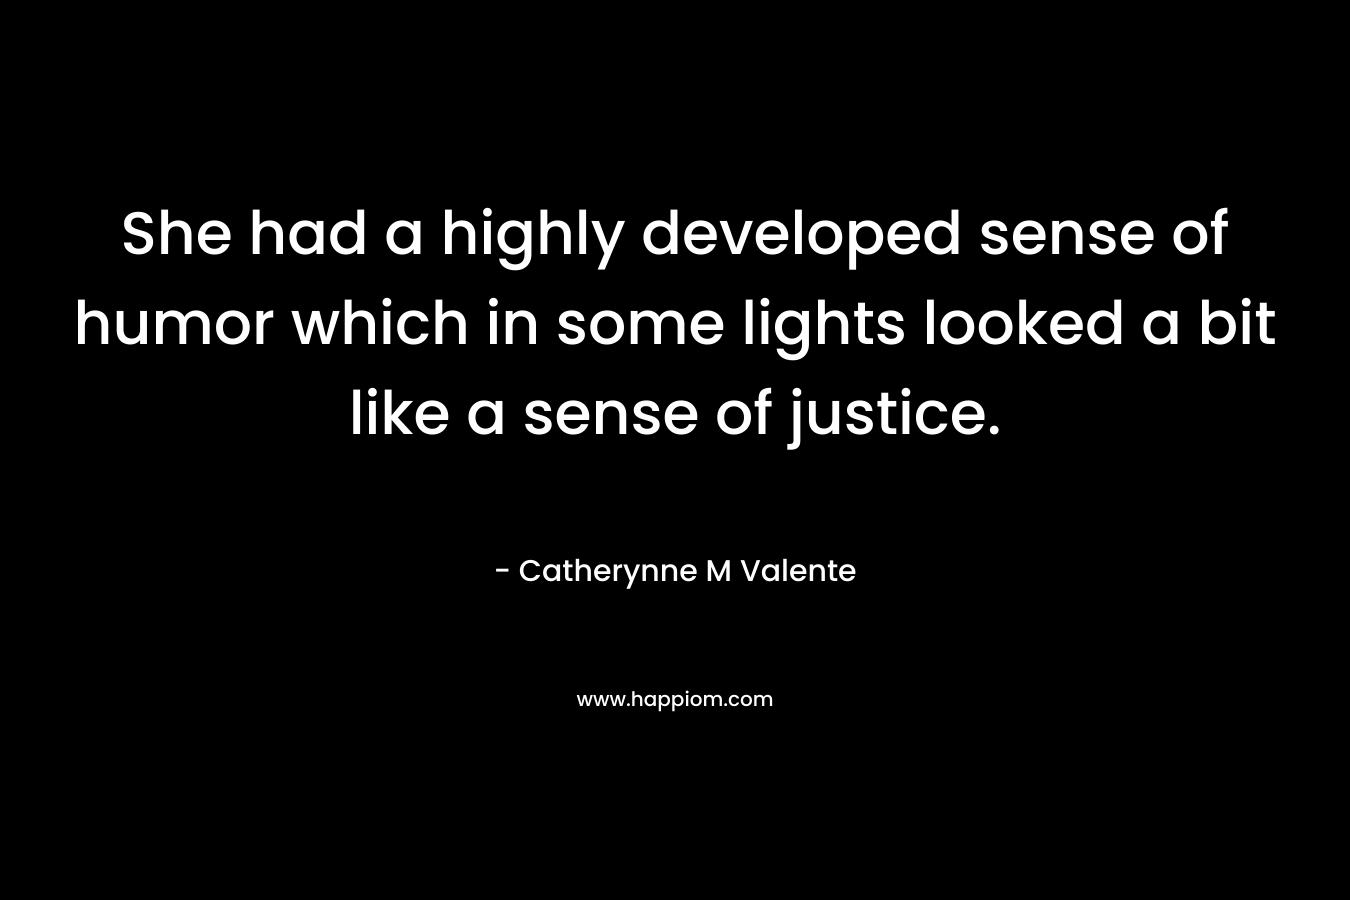 She had a highly developed sense of humor which in some lights looked a bit like a sense of justice.